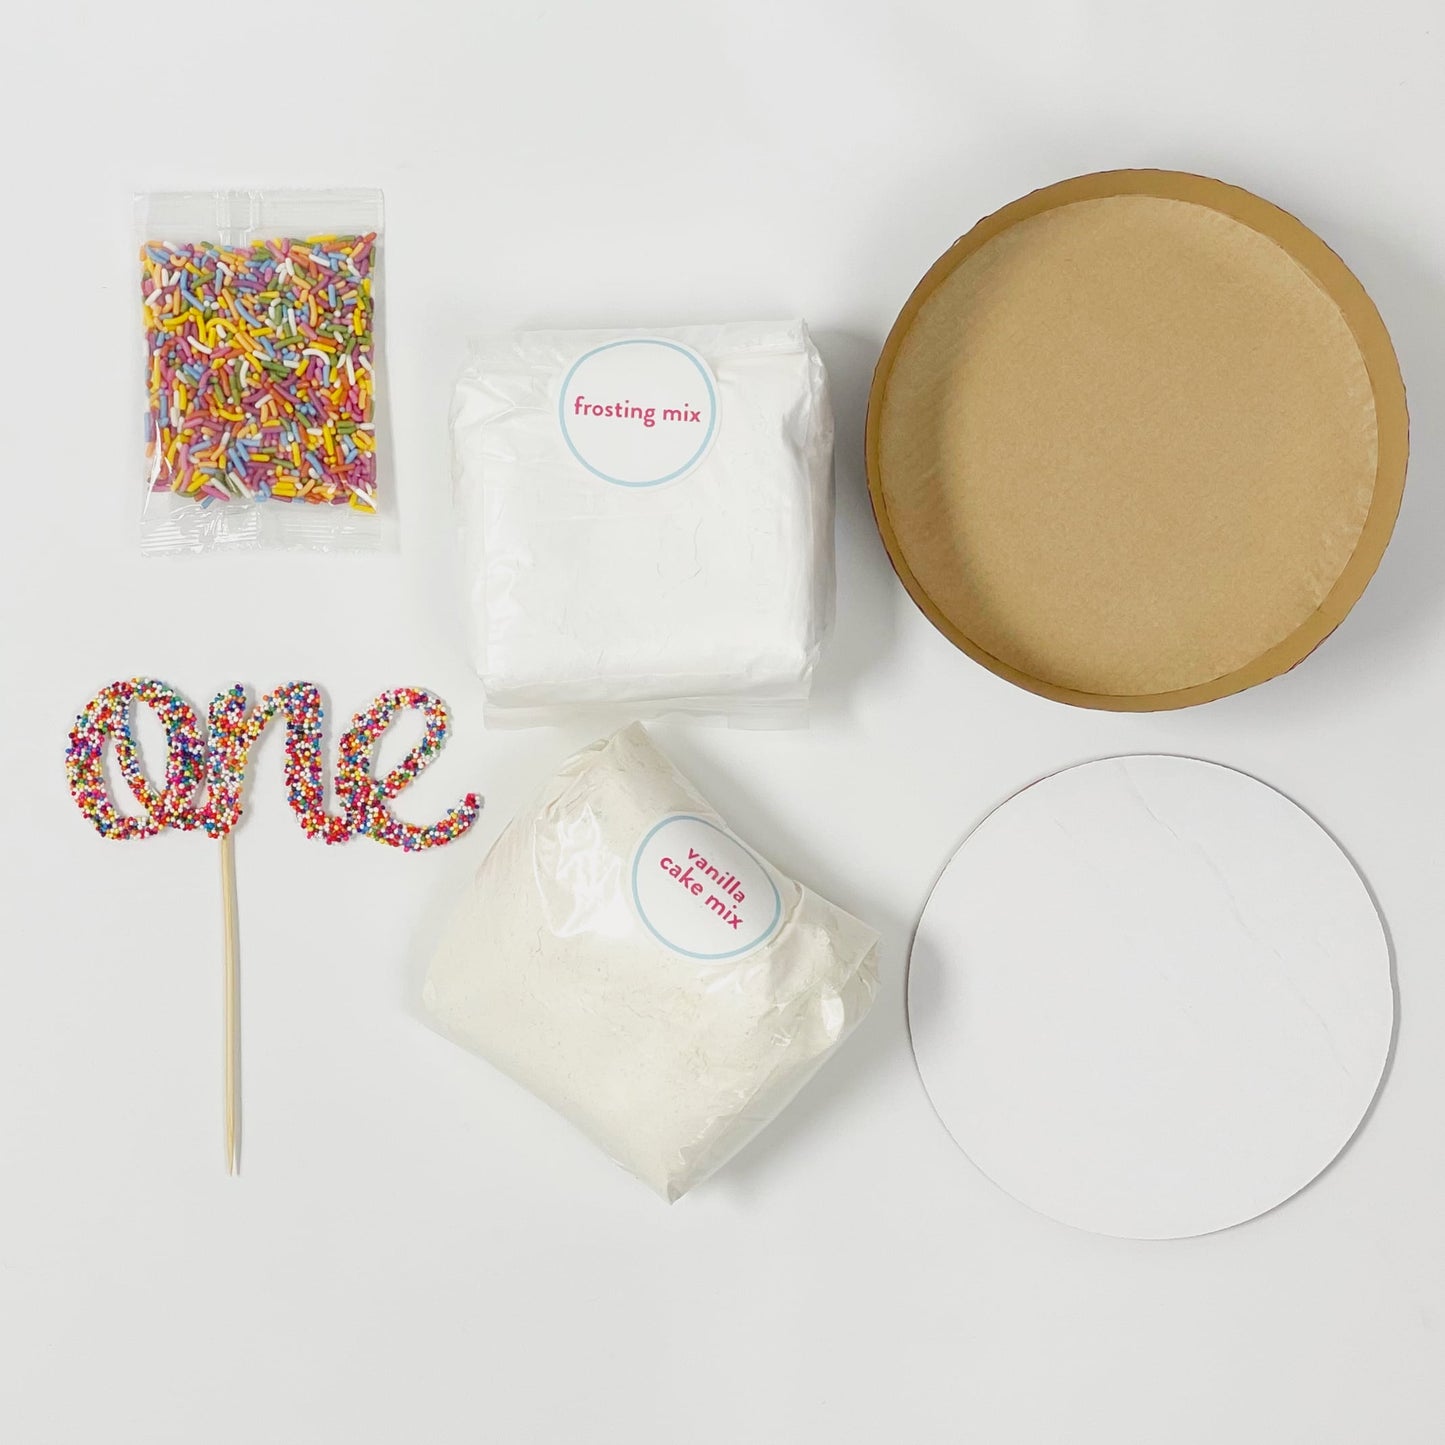 Smash cake kit with cake mix, frosting mix, sprinkles, and one sprinkle cake topper